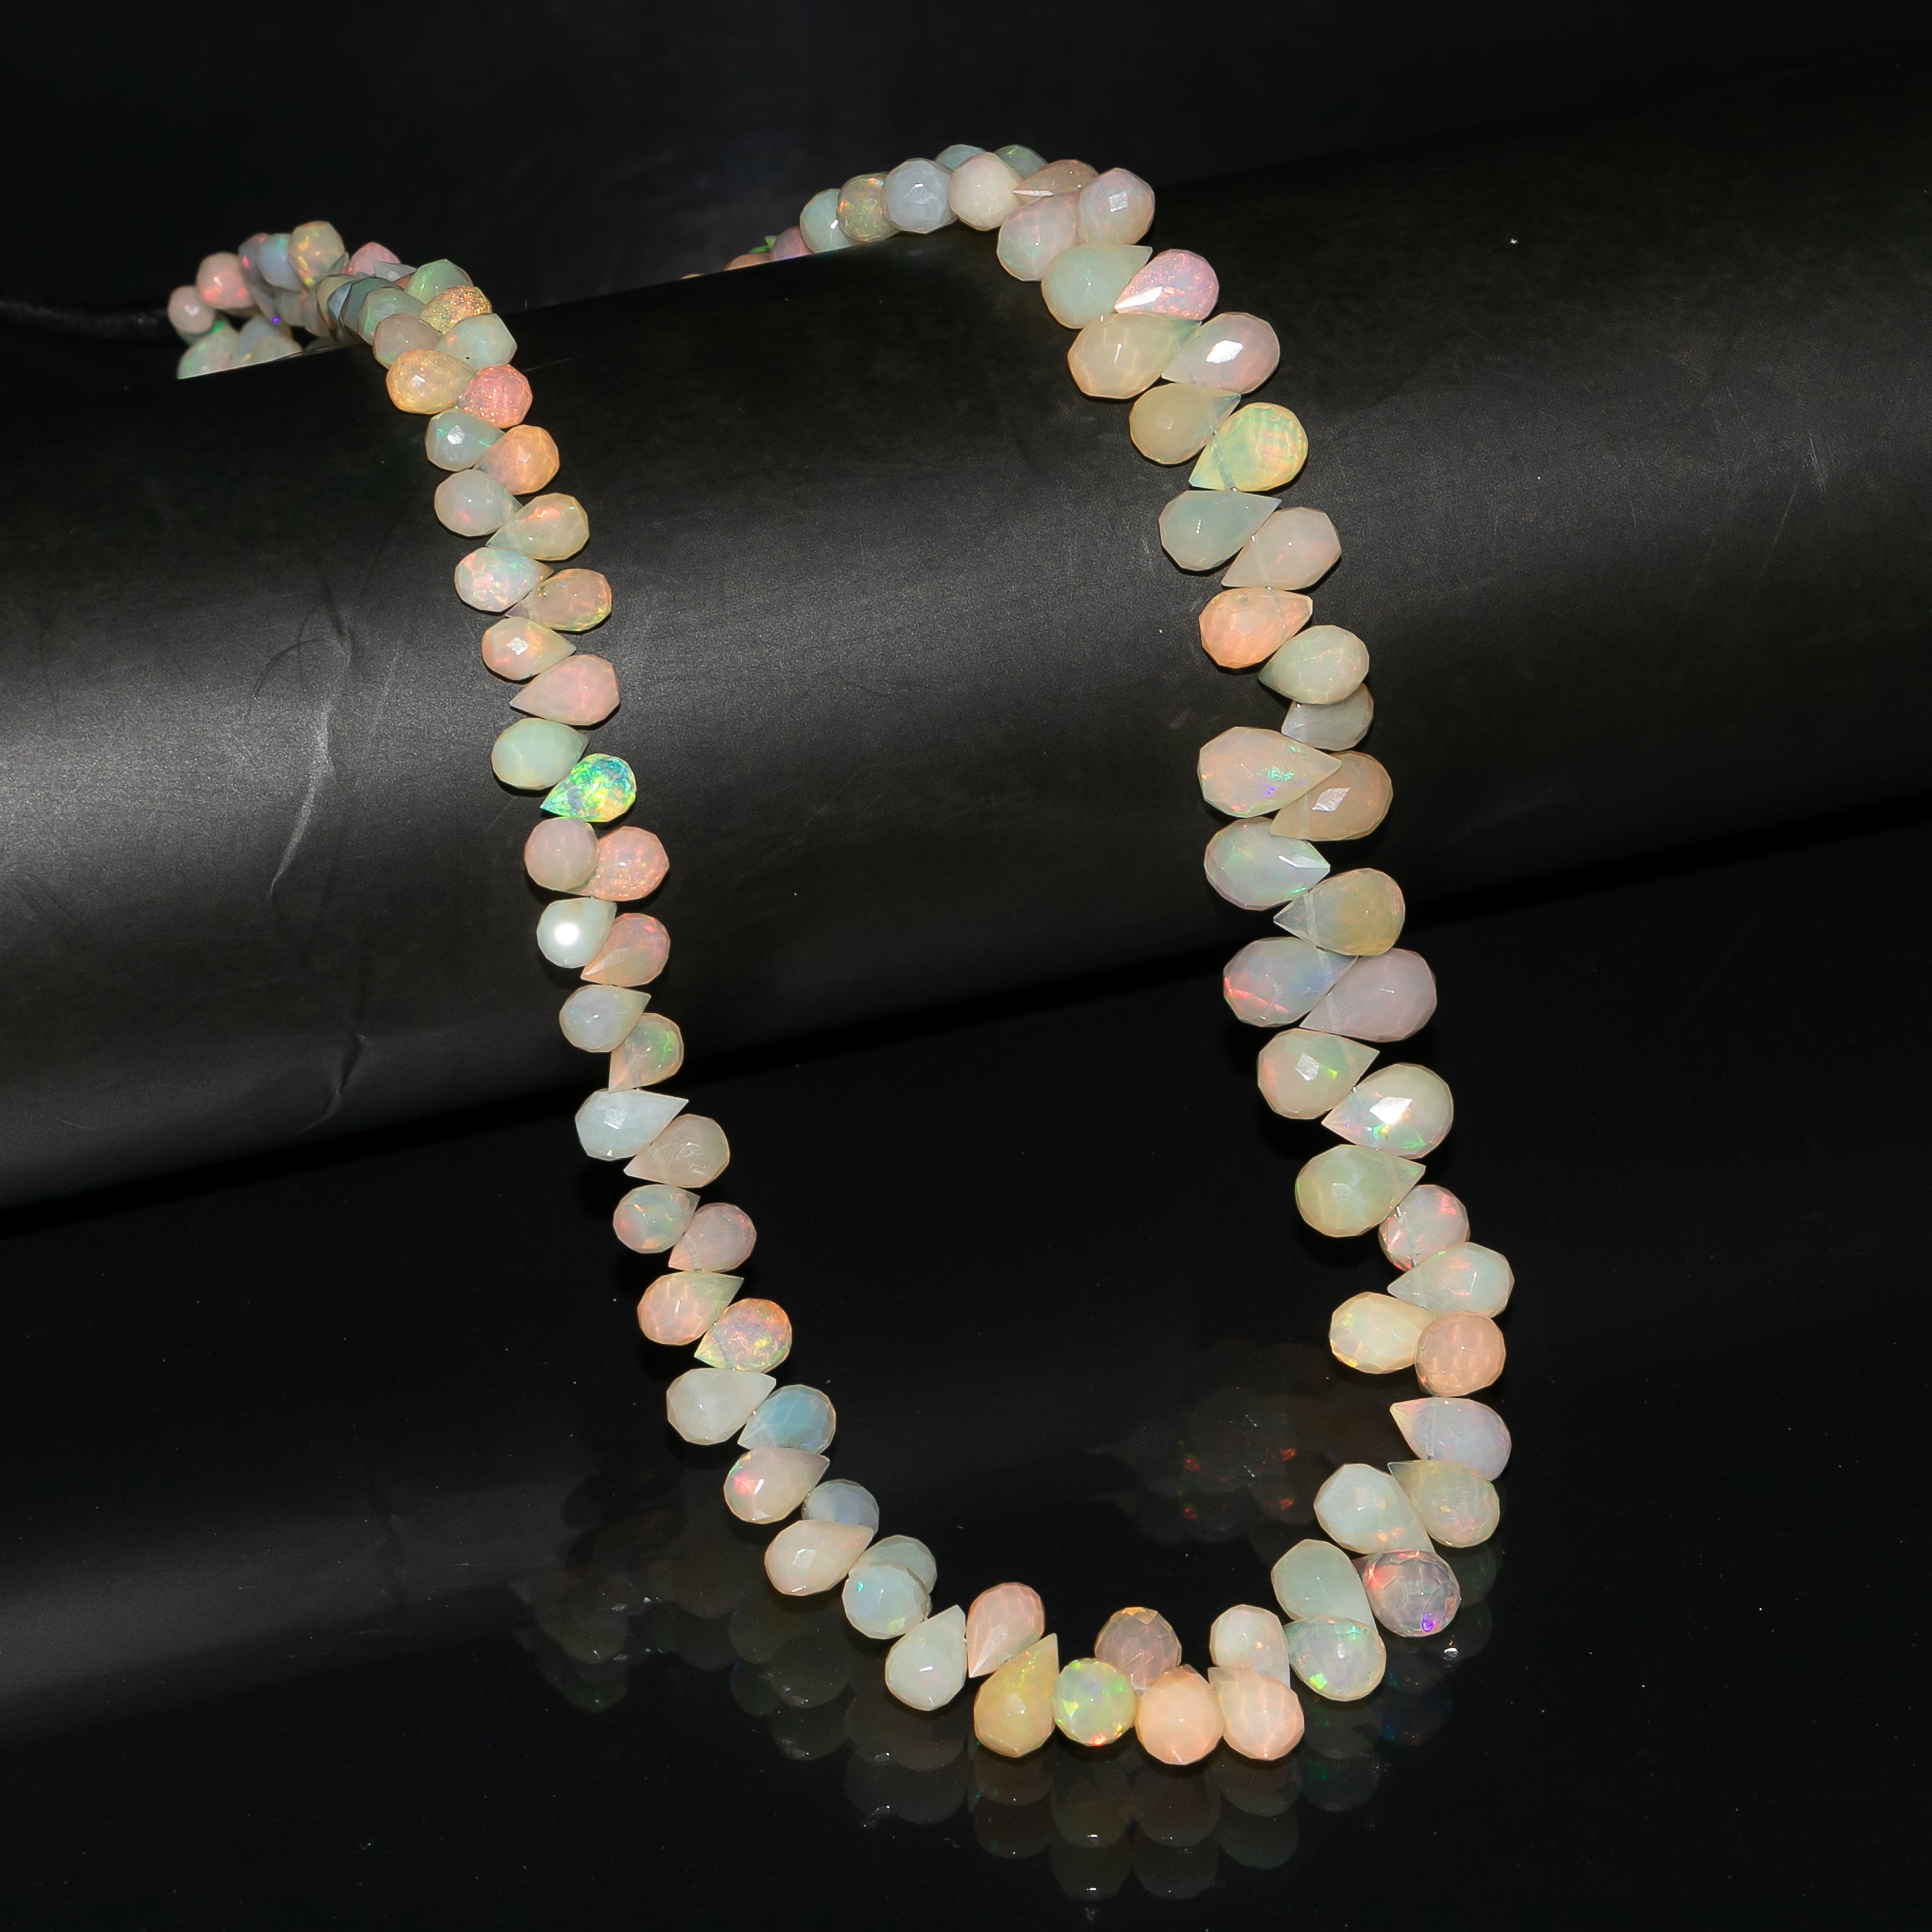 Natural Ethiopian Opal Briolette Drops, Loose Opal Beads For Jewelry, Gemstone Beads